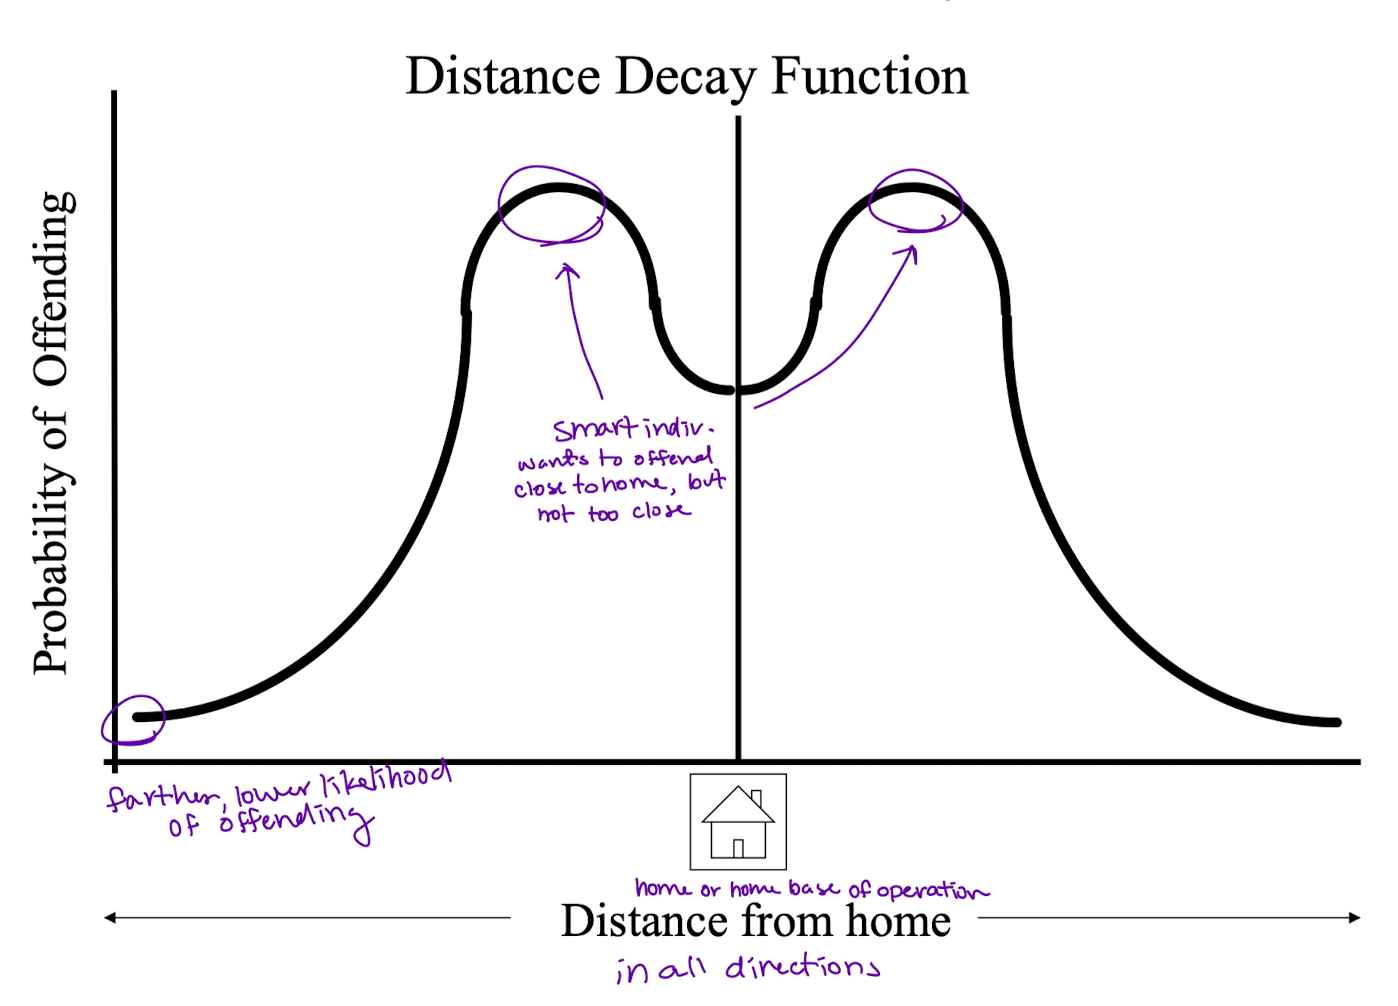 <p>graph of distance from home compared to probability of offending, peaks on all sides of home a bit away </p>